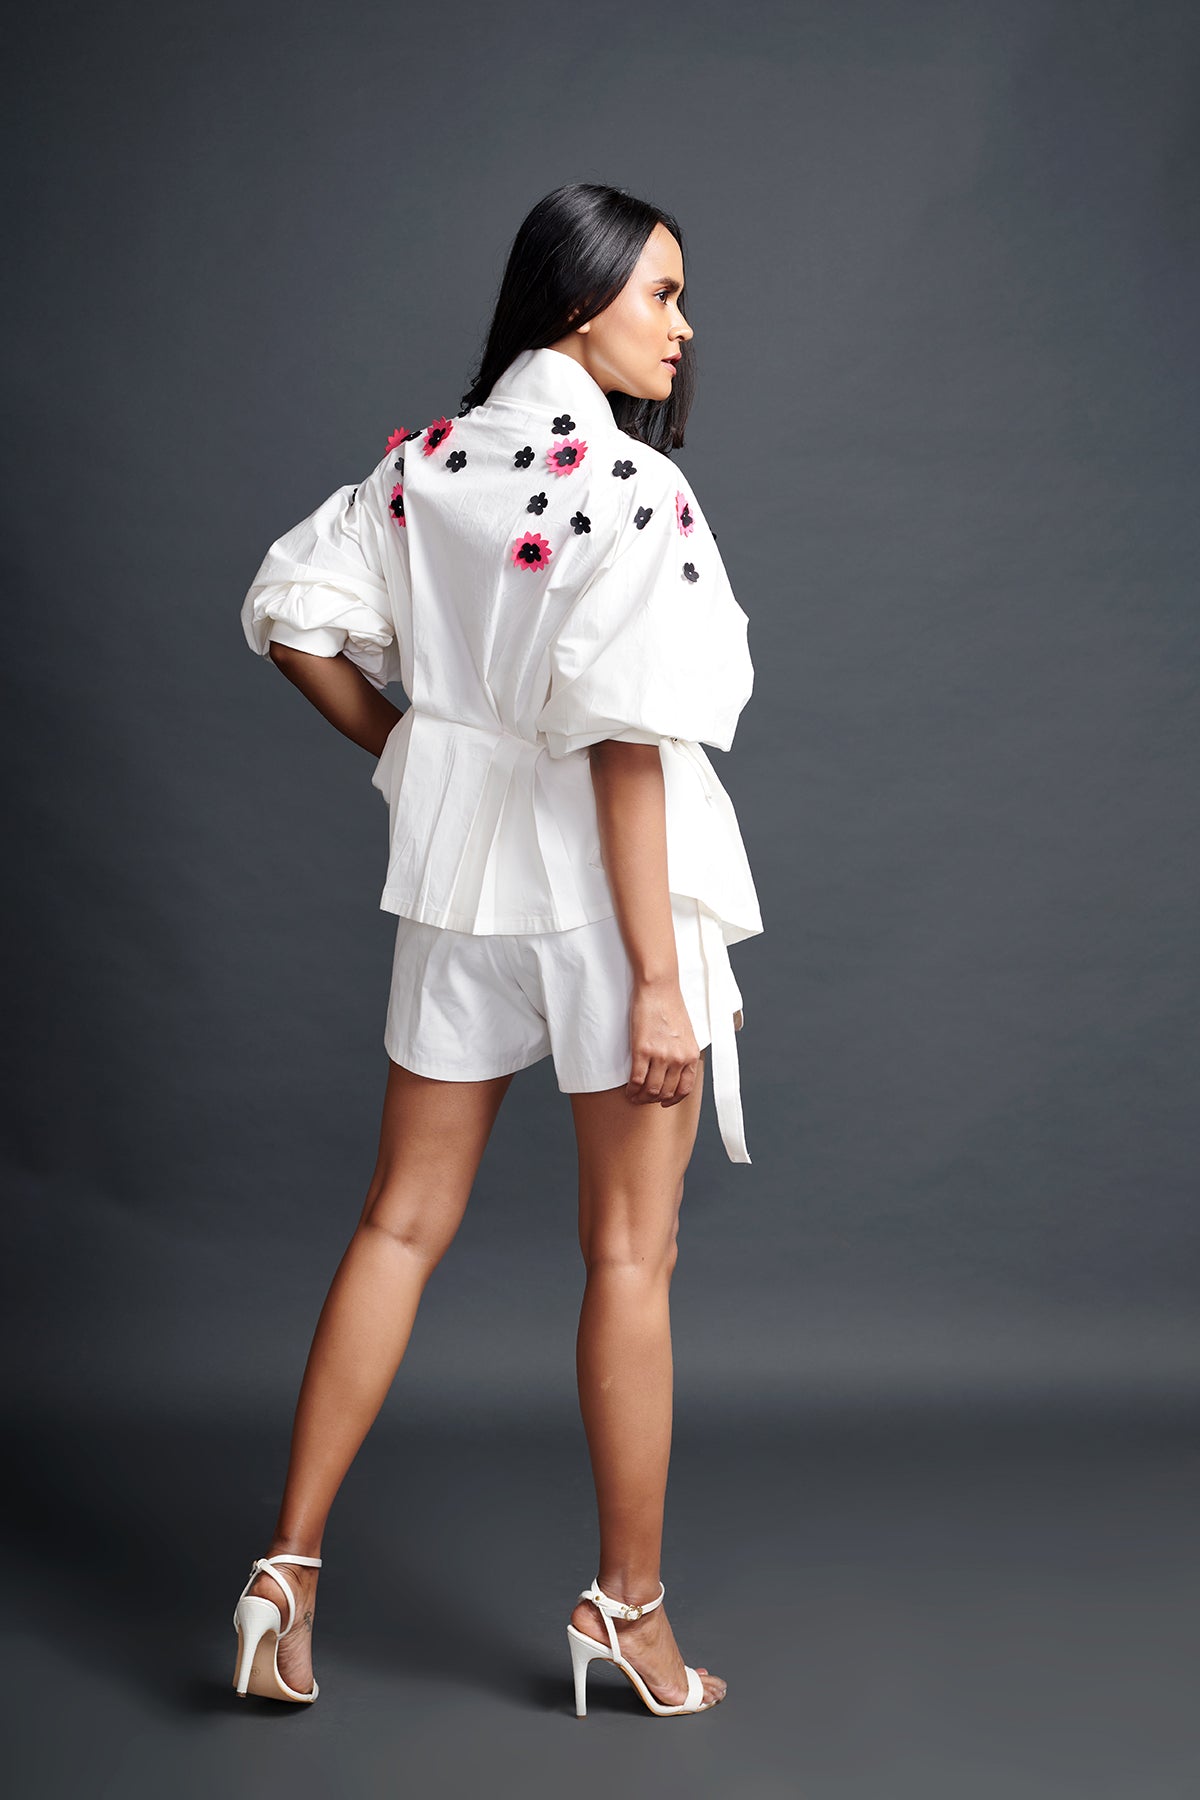 Image of WHITE SHIRT IN COTTON BASE WITH PLEATED CONFETTI DETAIL. IT IS PAIRED WITH MATCHING SHORTS. From savoirfashions.com